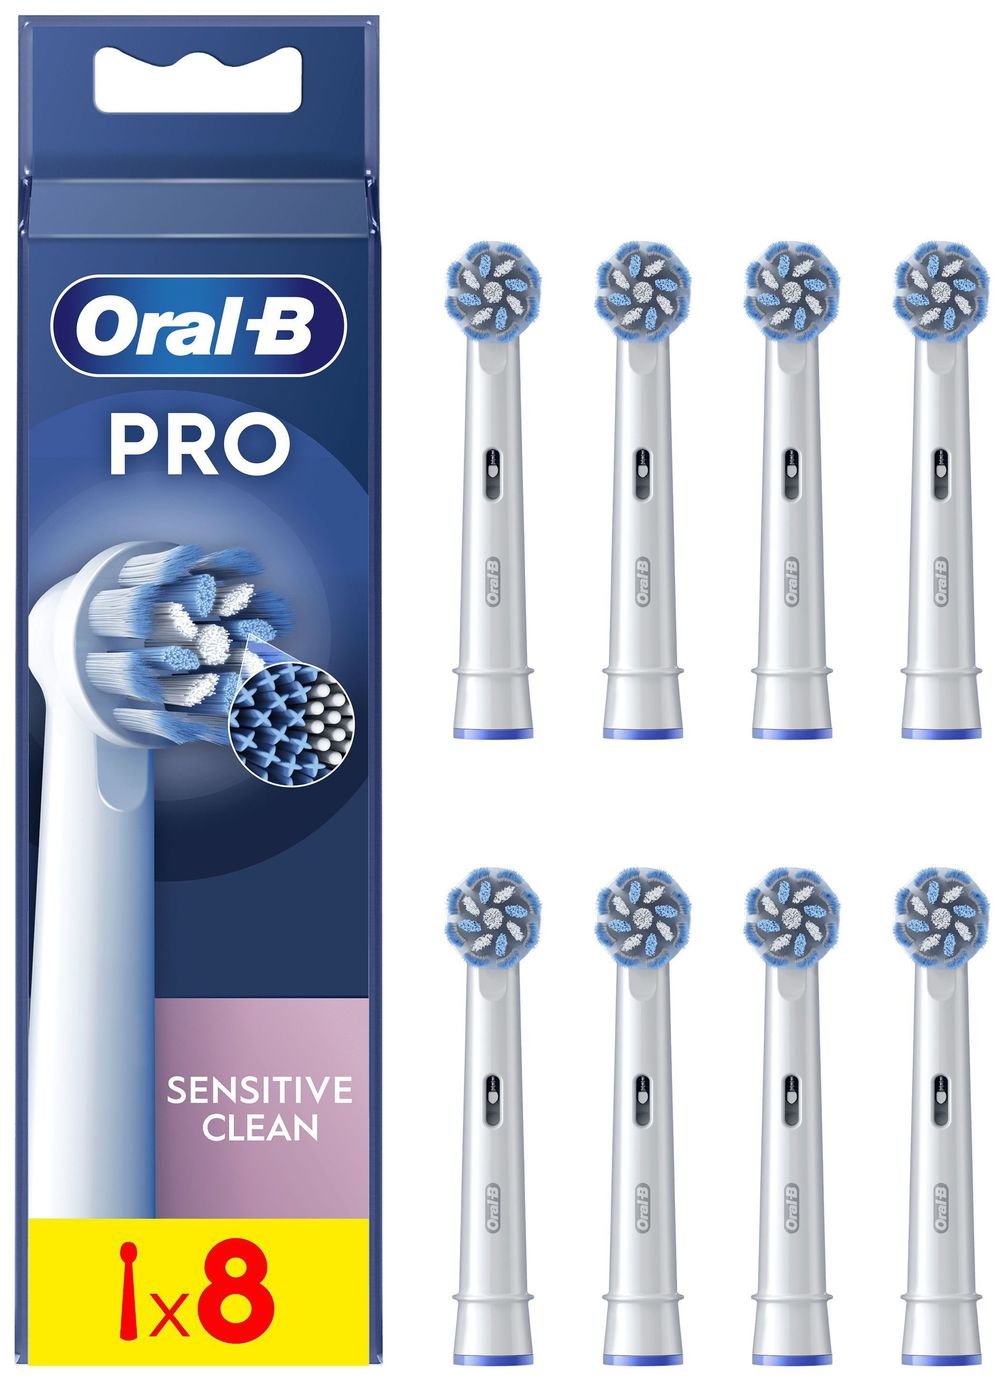 Oral-B Pro Sensitive Clean Electric Toothbrush Heads-8 Pack